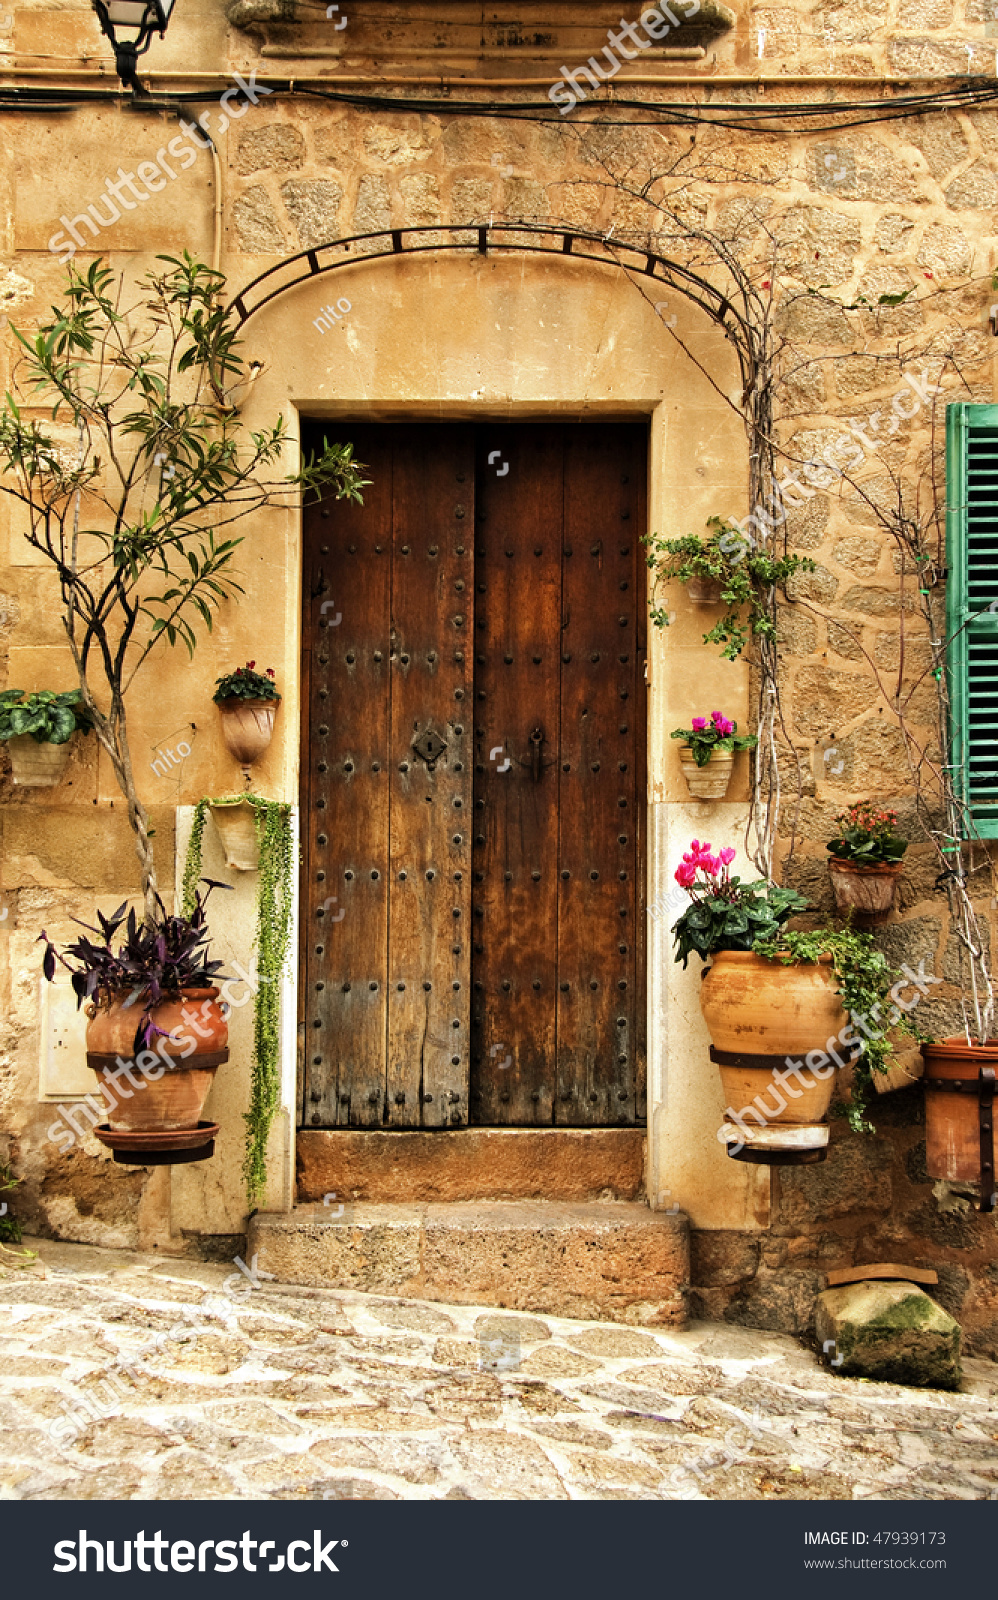 A View Of A Litle Old Mediterranean Village Stock Photo 47939173 ...